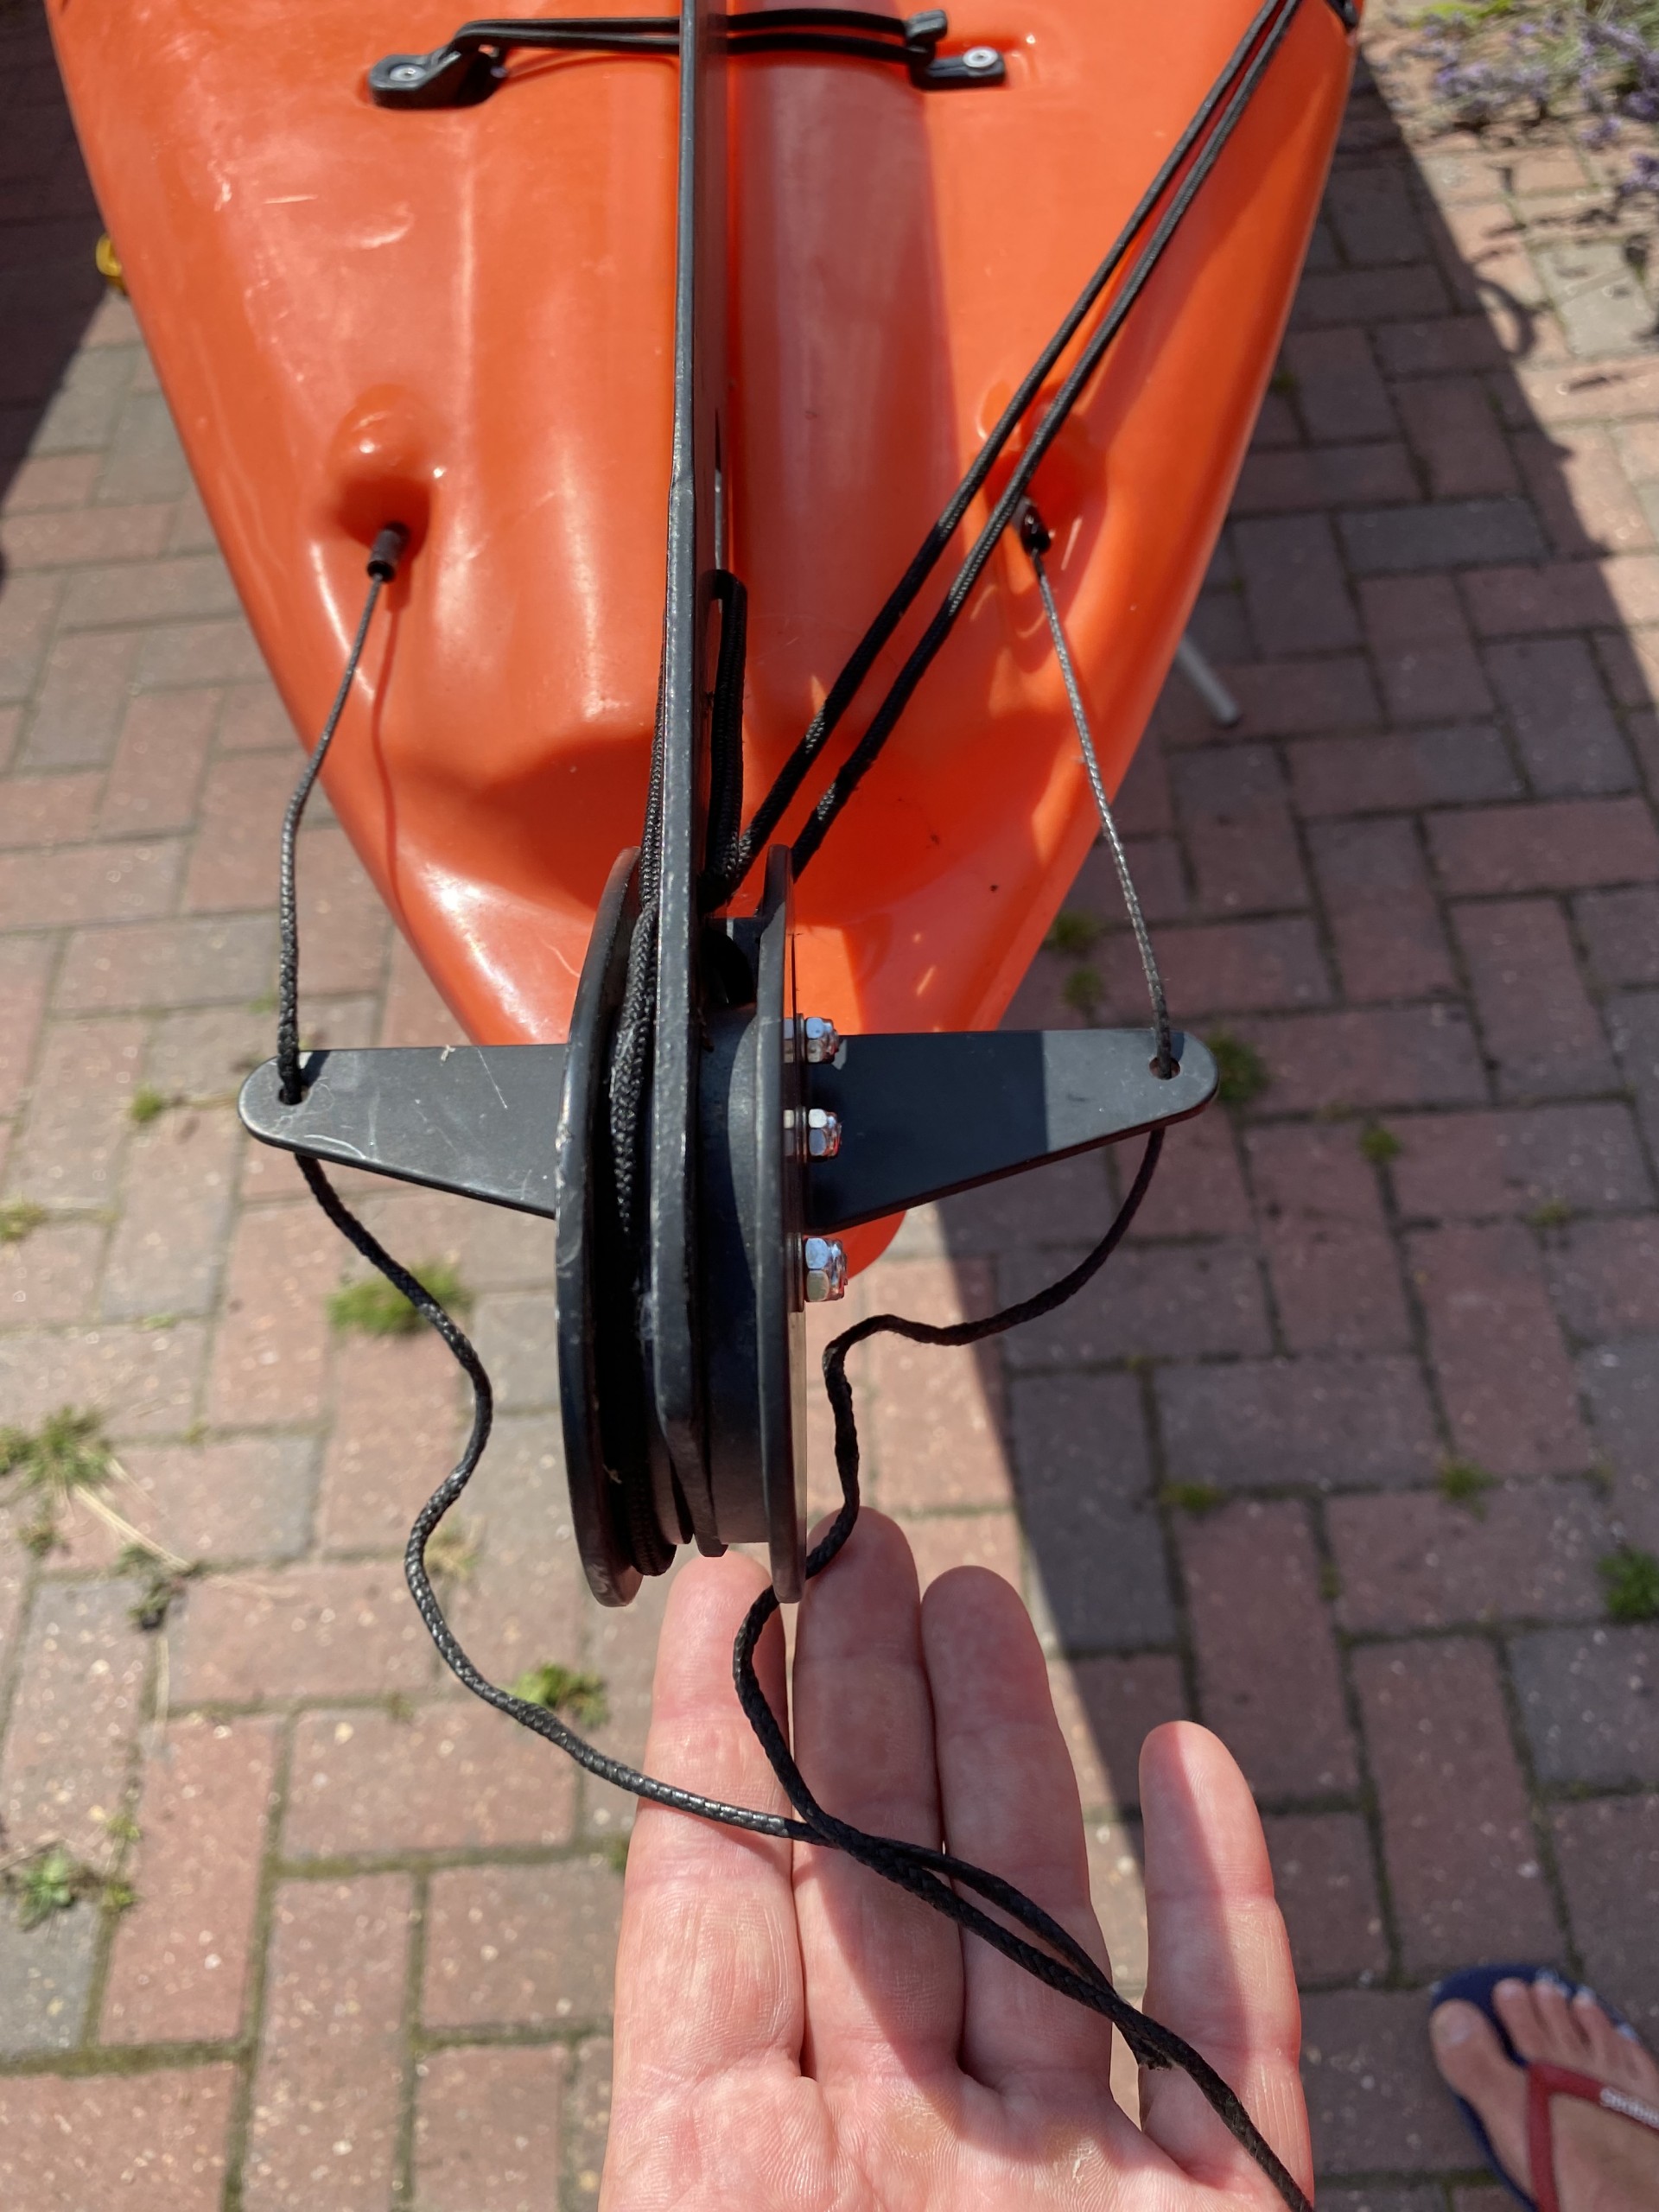 Sit-on-top kayak rudder showing untied steering cables.